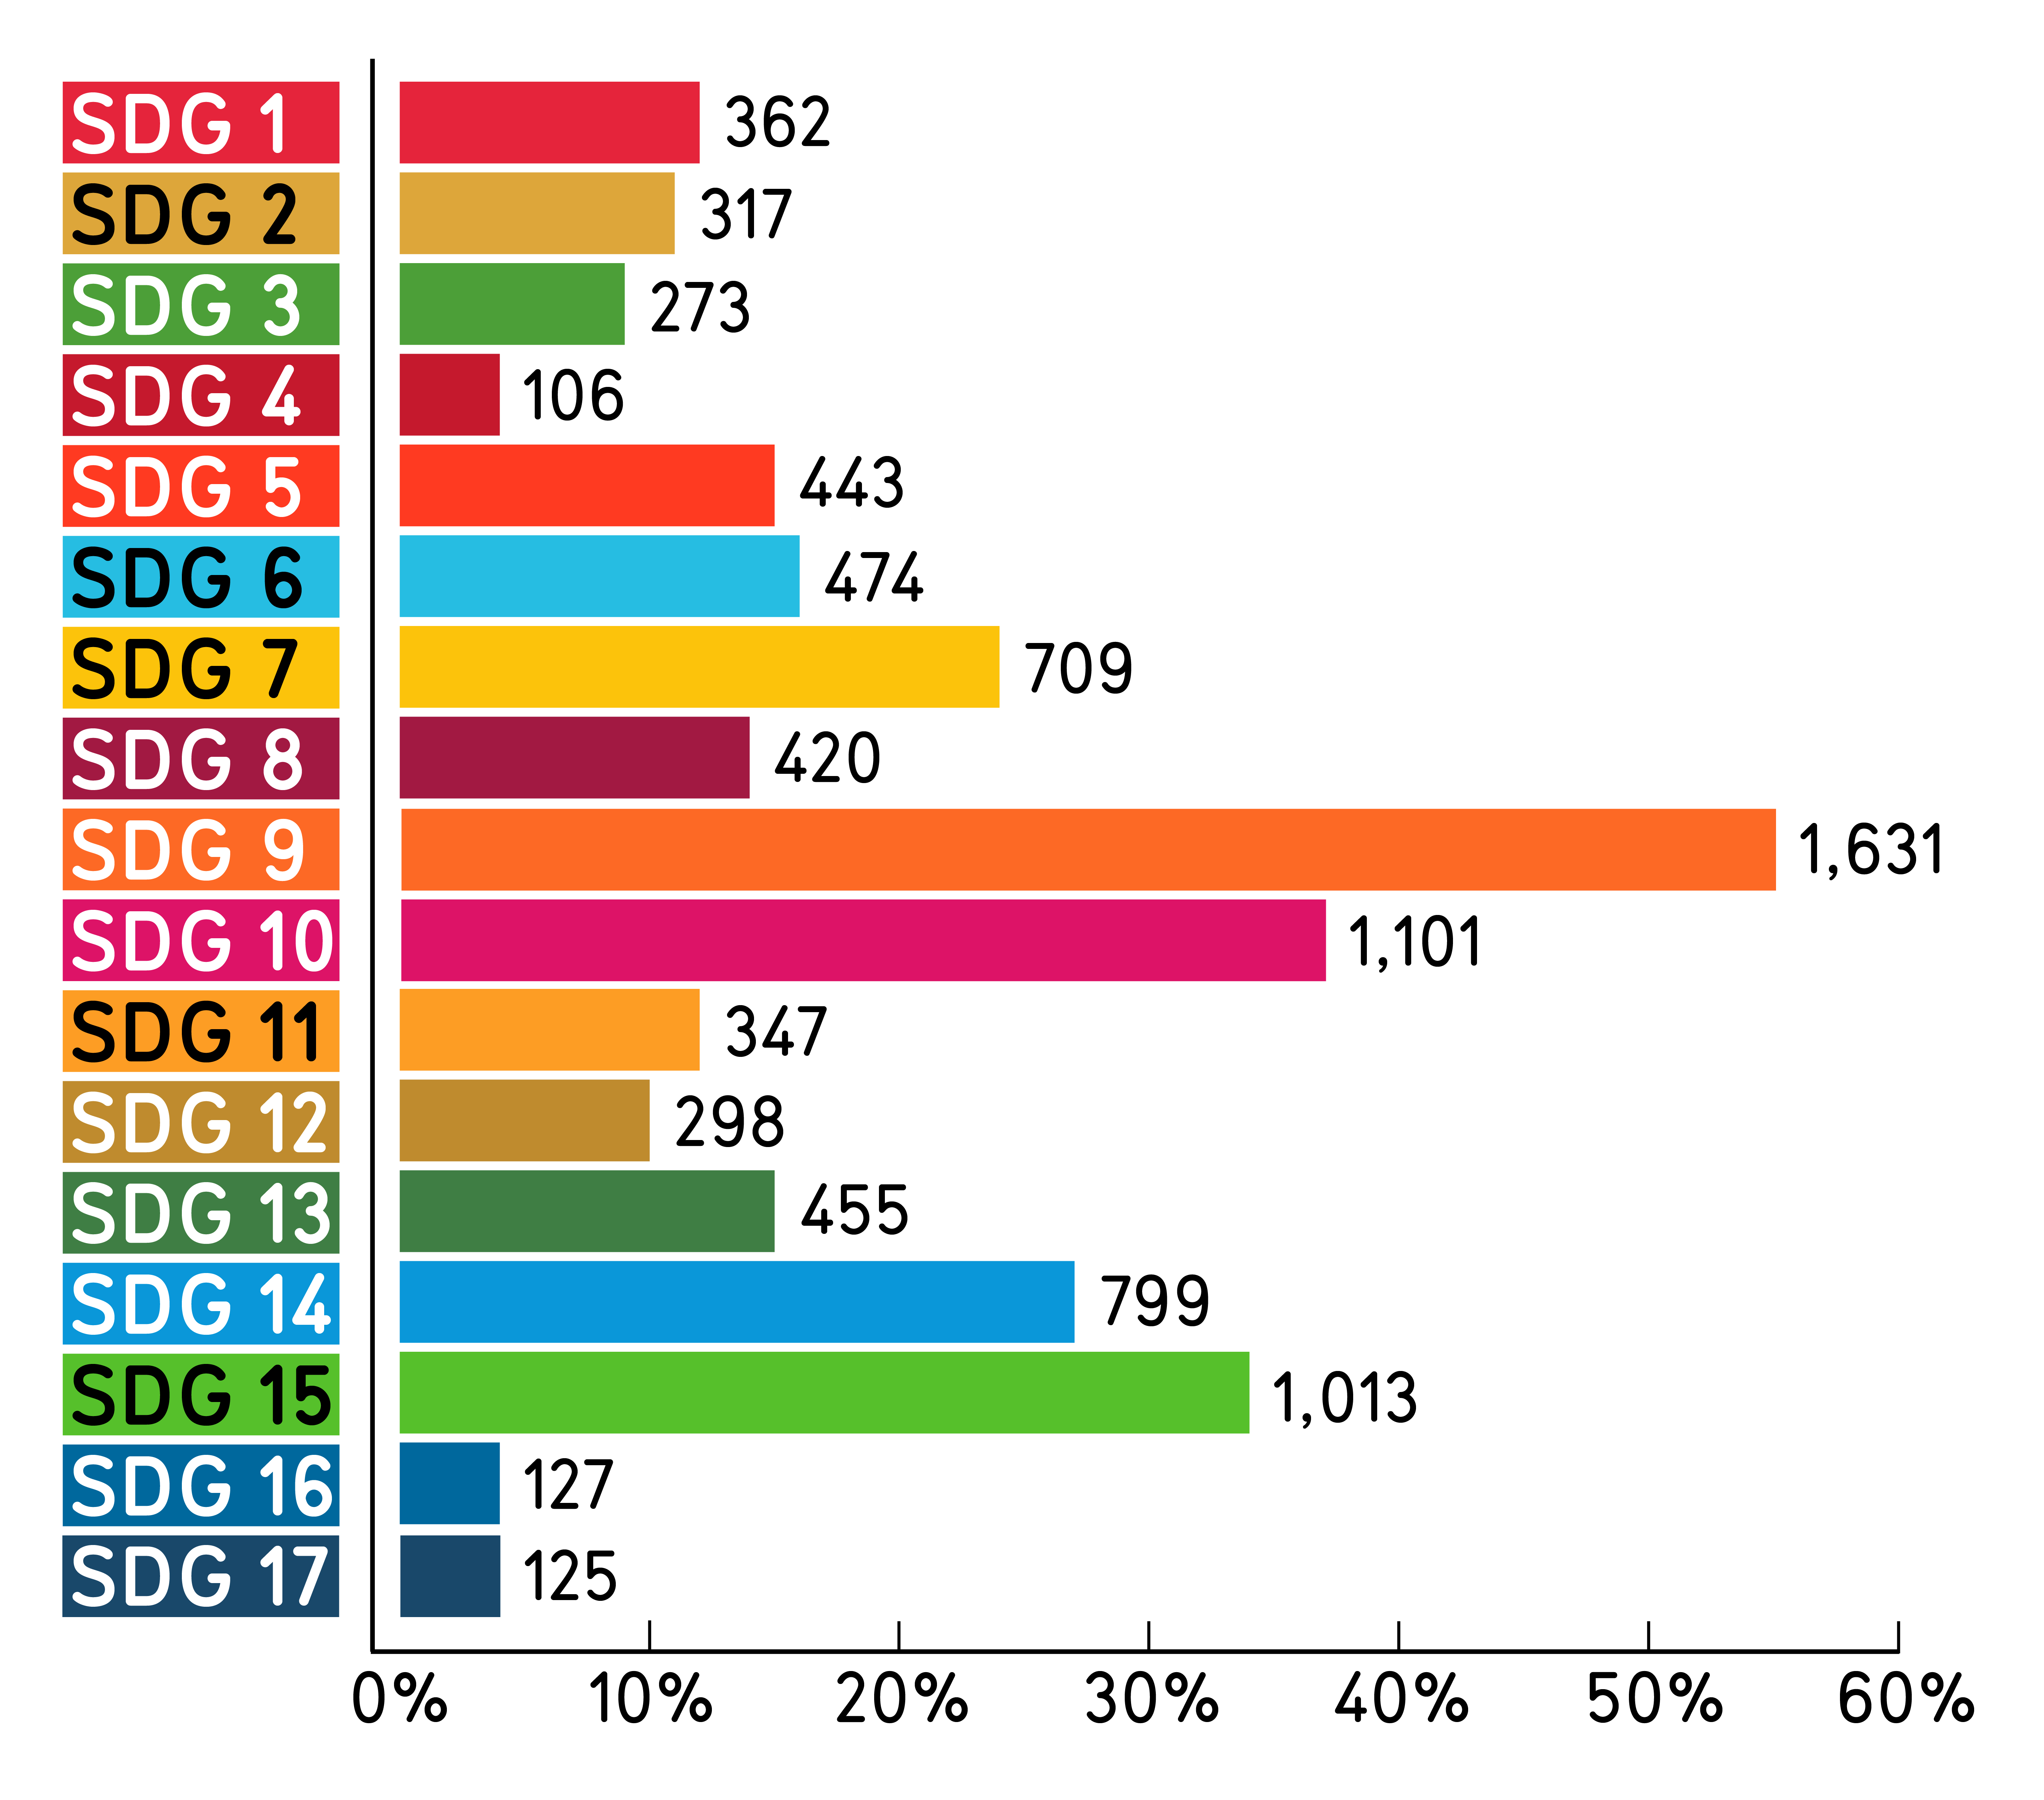 SDG chart showing which SDGs were most impacted during a work term based on the student's perspective